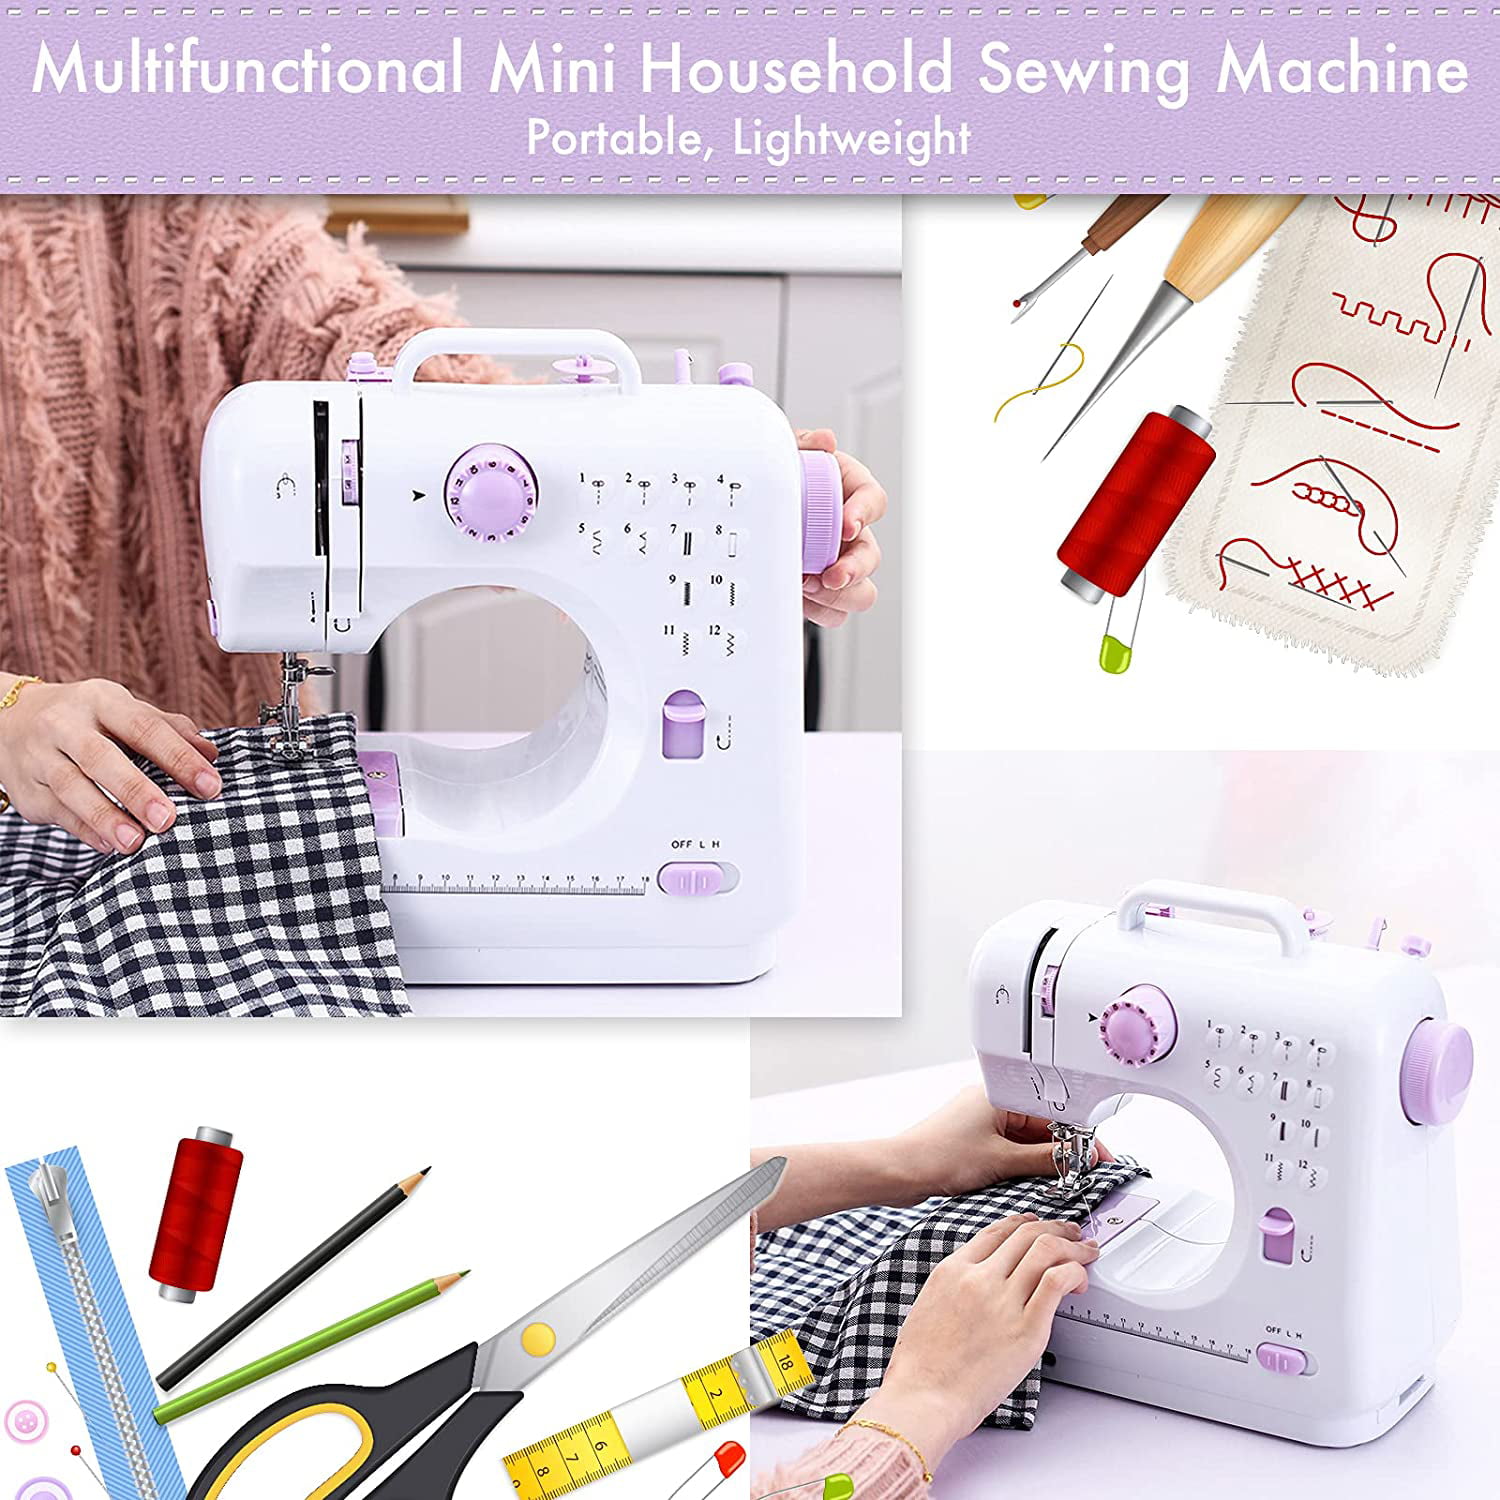 Viferr Electric Portable Mini Sewing Machine 12 Built-In Stitches 2 Speeds Double Thread,Foot Pedal, Size: 10.83 x 4.76 x 10.24, Pink